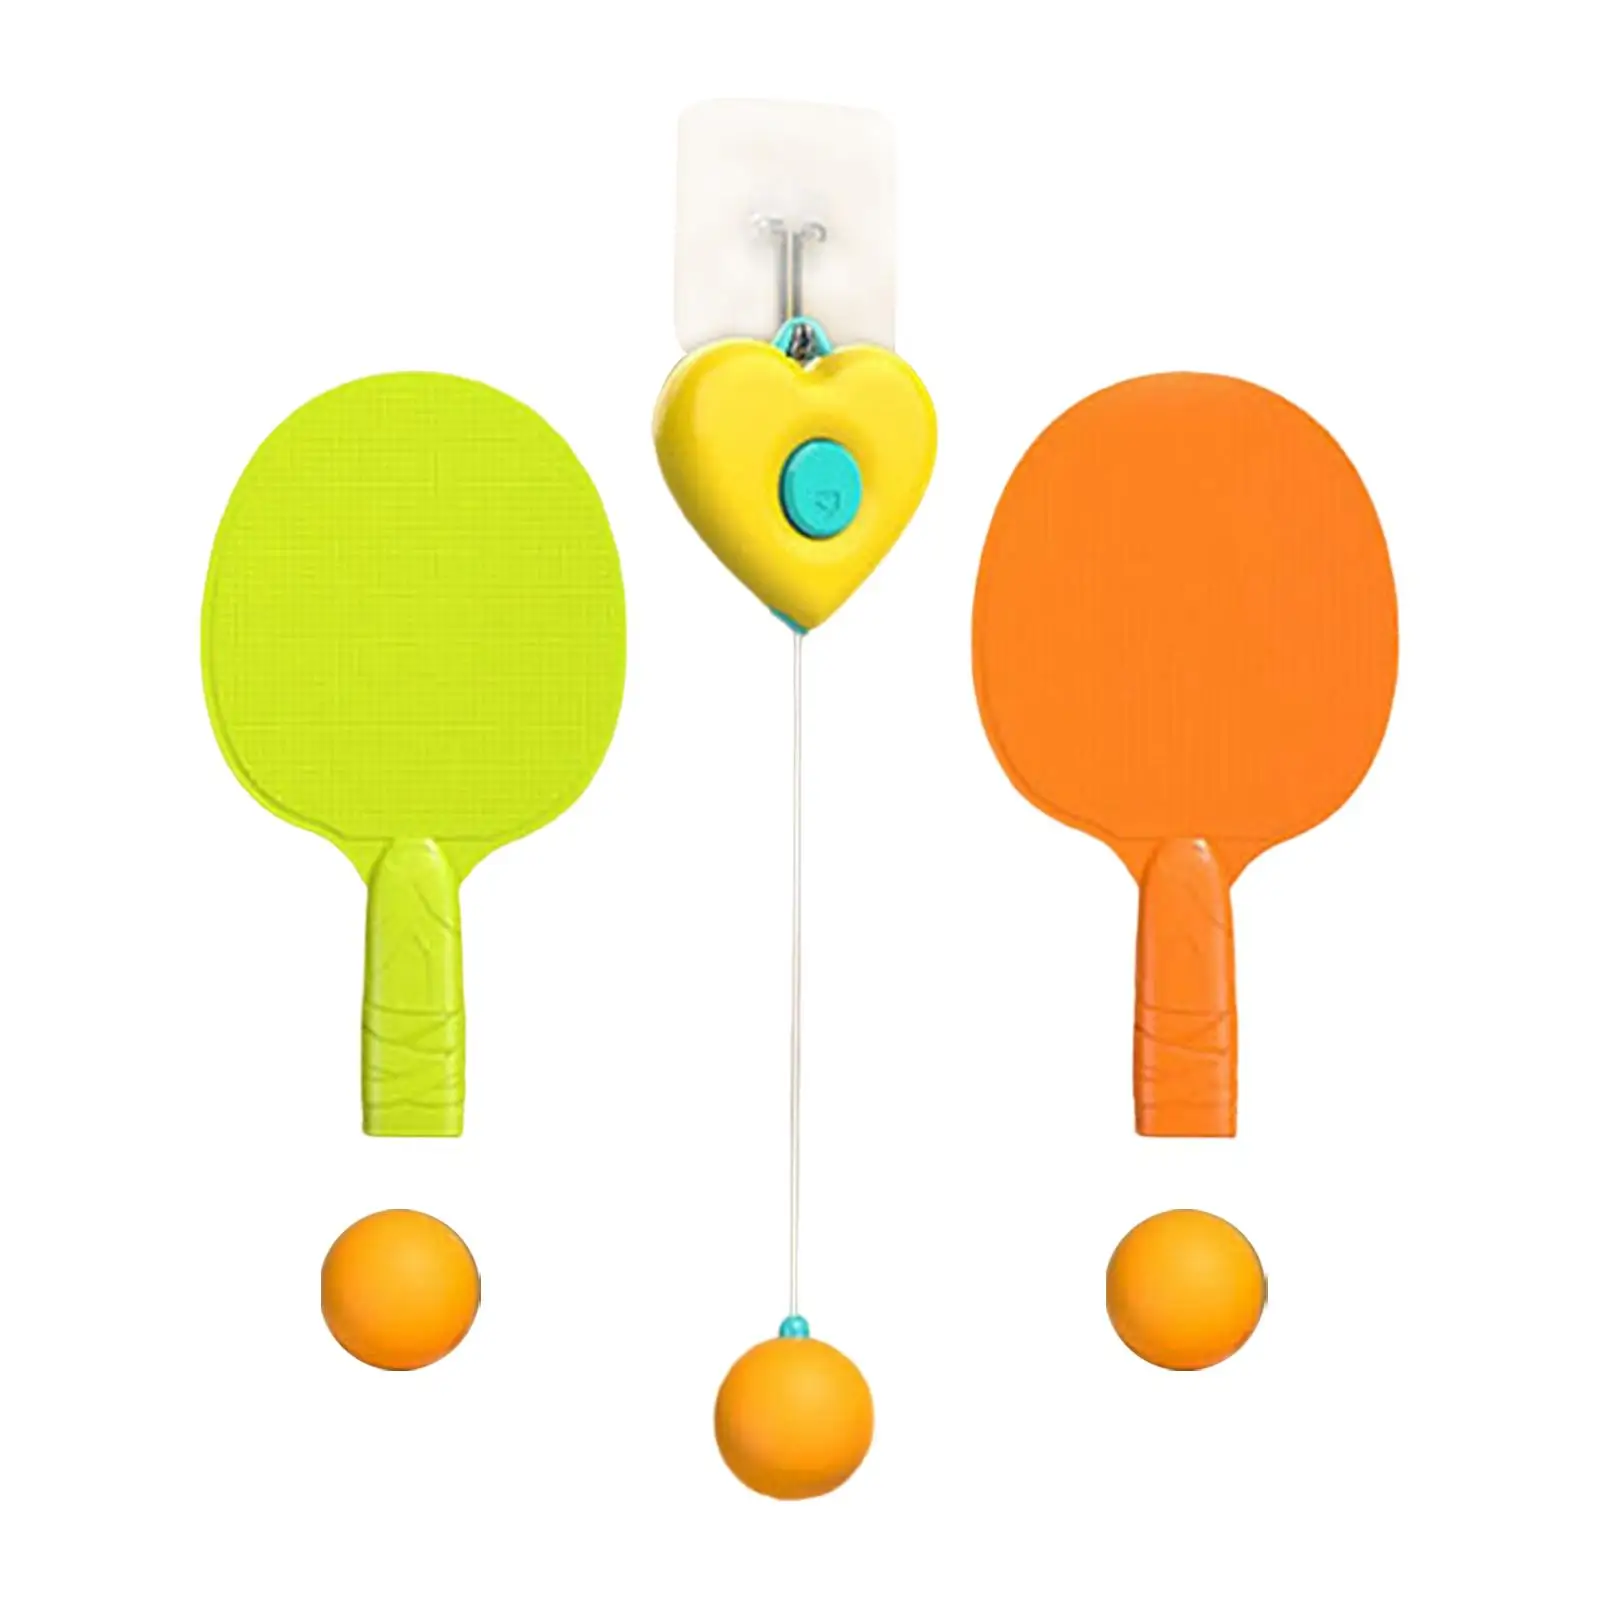 Table Tennis Trainer Tennis Practice Equipment Self Training for Kids Gifts